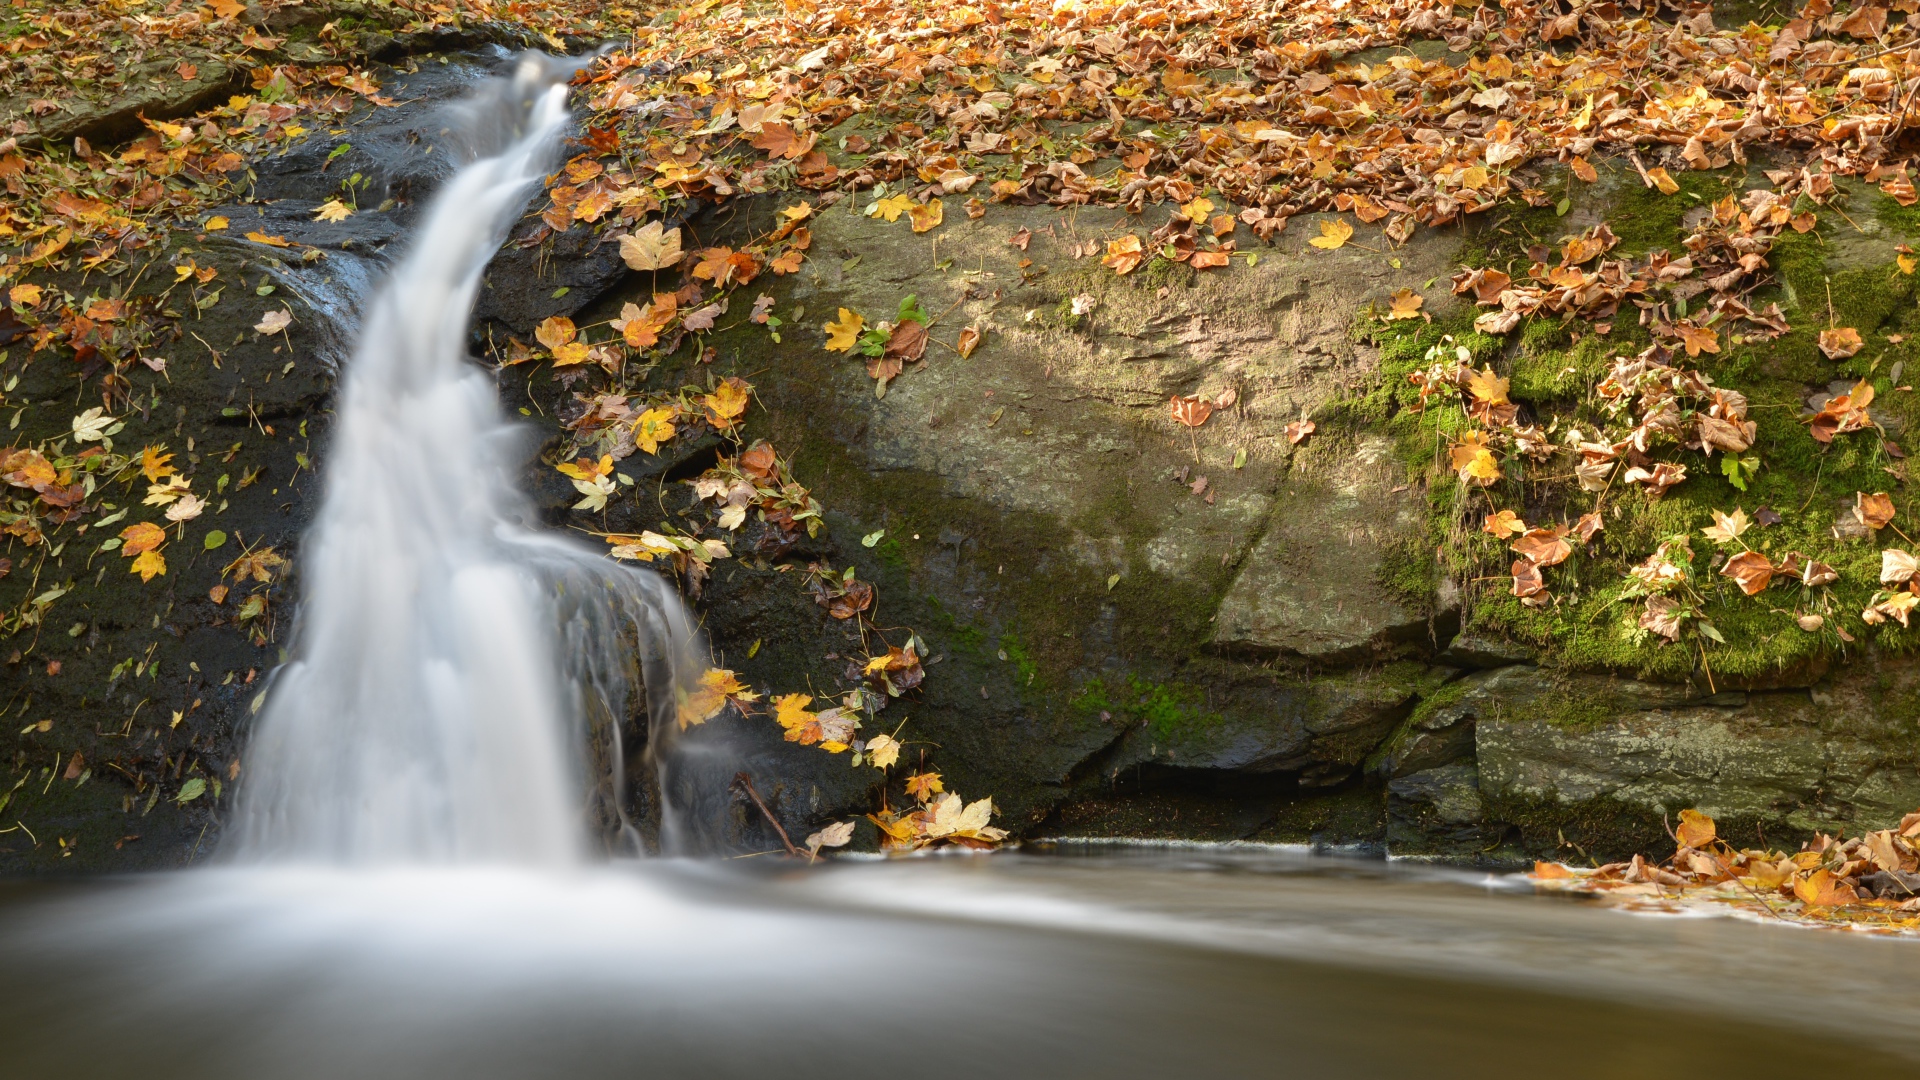 A small waterfall flows into the river on stones covered with fallen leaves